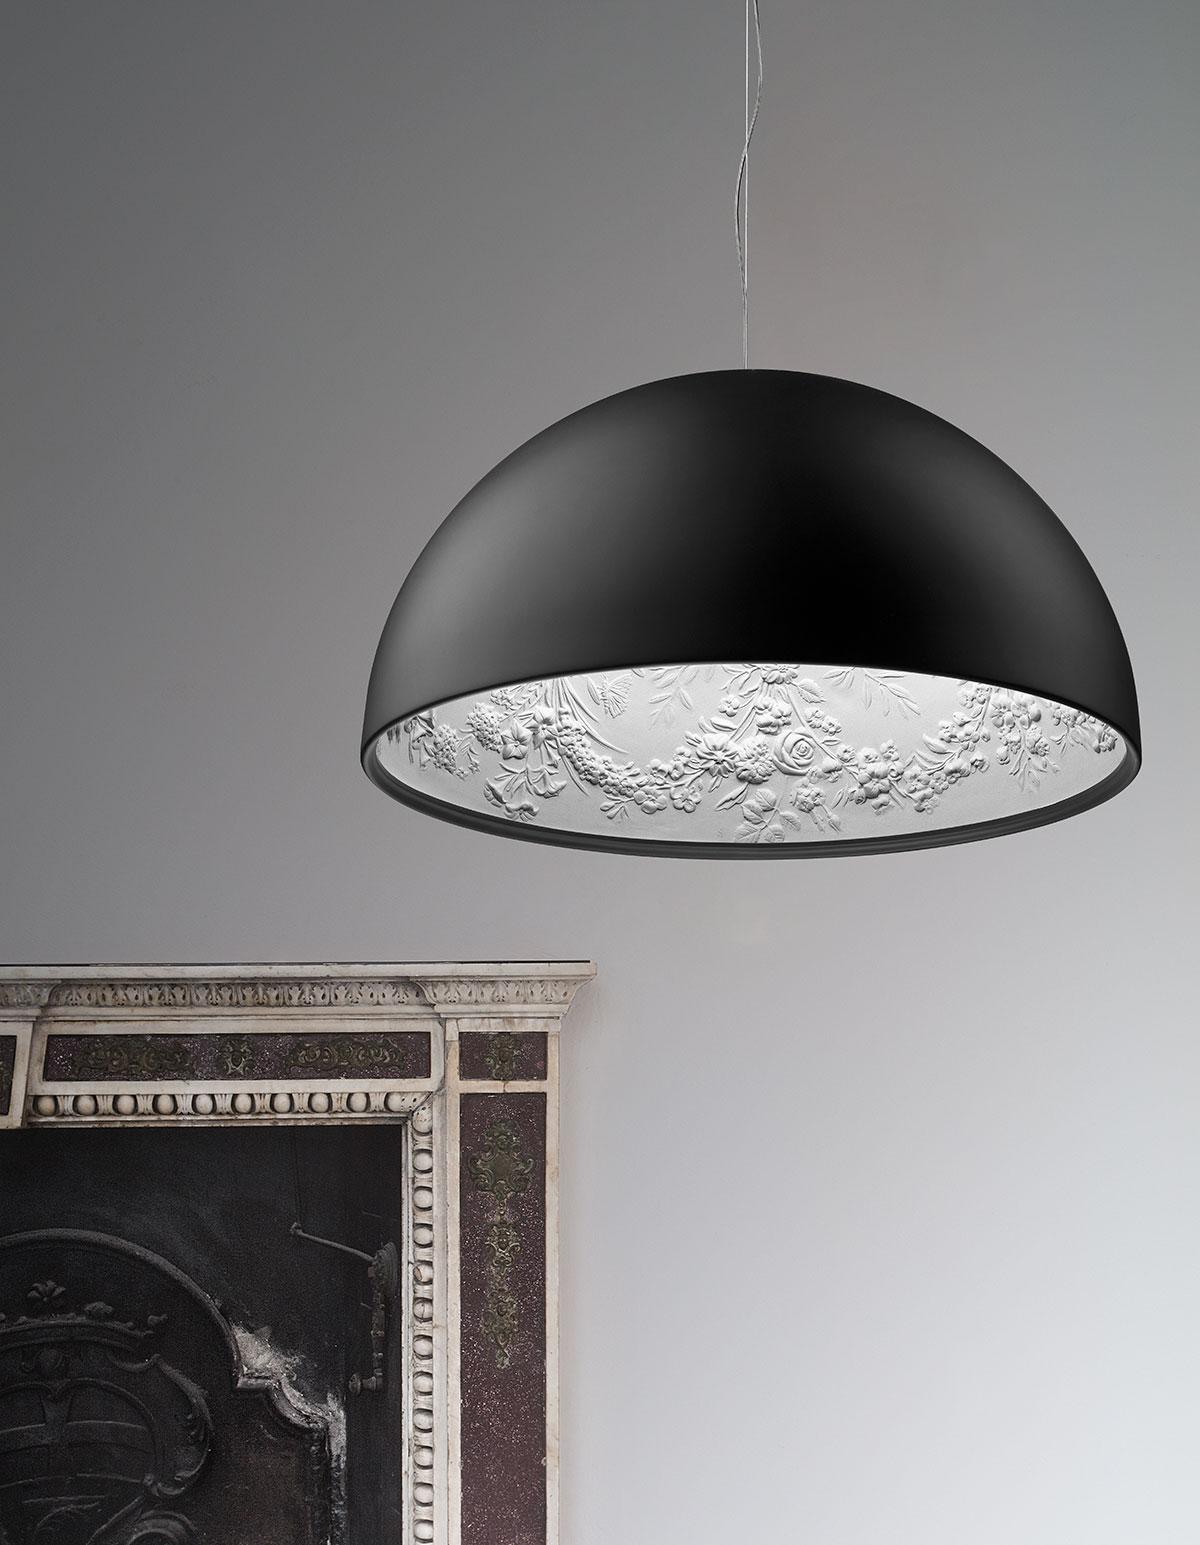 Flos Skygarden S2 suspension lamp in matt black by Marcel Wanders

Material: Plaster, glass, stainless steel
Lamp type: Halogen
Lamp included: Yes
Light source: 1 x 250W T-10 medium frosted halogen (Included)
Mounting: Ceiling pendant
Dimming